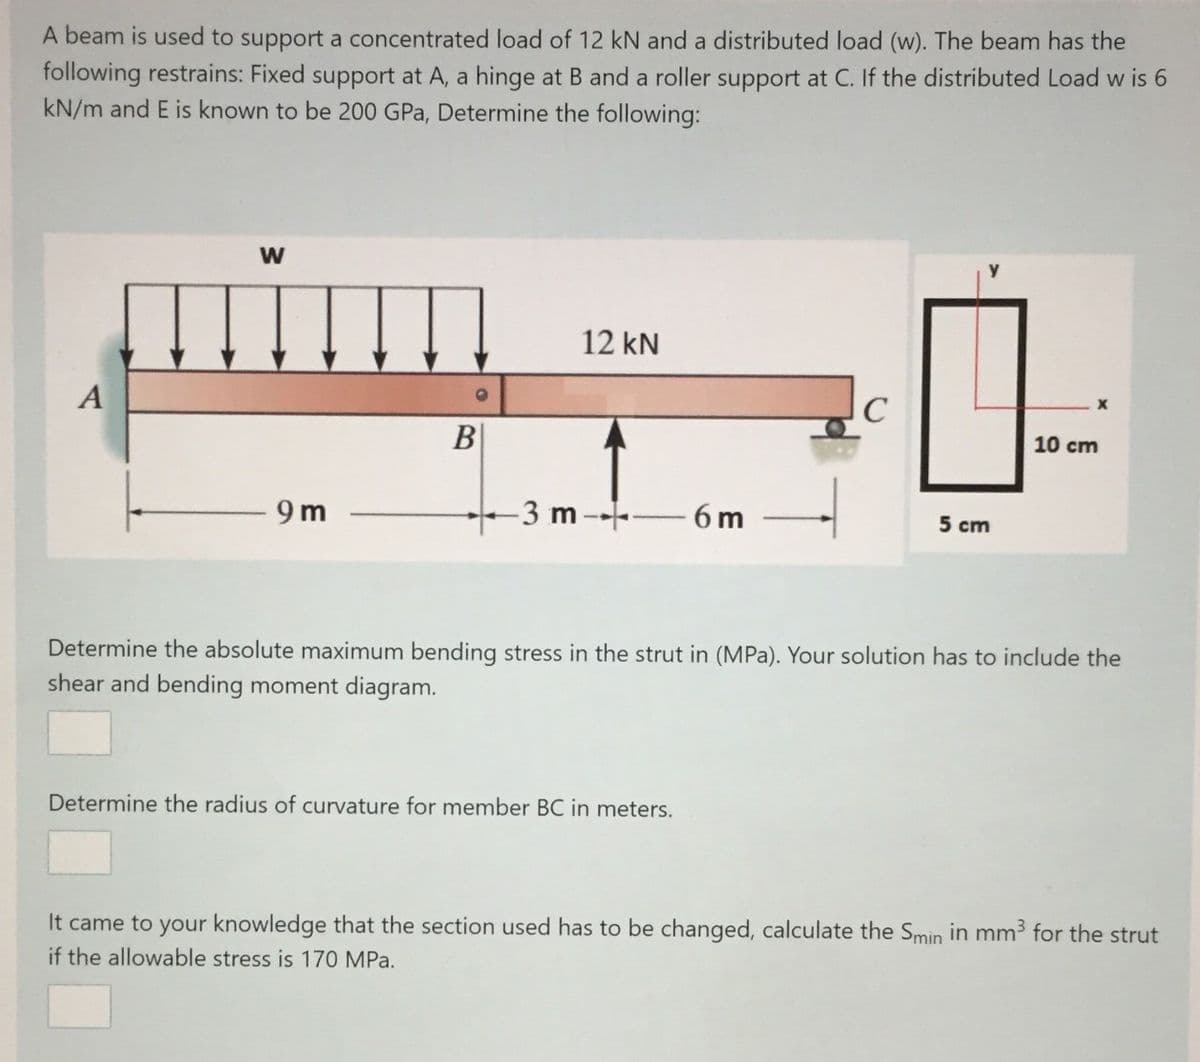 A beam is used to support a concentrated load of 12 kN and a distributed load (w). The beam has the
following restrains: Fixed support at A, a hinge at B and a roller support at C. If the distributed Load w is 6
kN/m and E is known to be 200 GPa, Determine the following:
12 kN
A
C
B
10 cm
9 m
-3 m -- – 6 m
5 cm
Determine the absolute maximum bending stress in the strut in (MPa). Your solution has to include the
shear and bending moment diagram.
Determine the radius of curvature for member BC in meters.
It came to your knowledge that the section used has to be changed, calculate the Smin in mm3 for the strut
if the allowable stress is 170 MPa.
